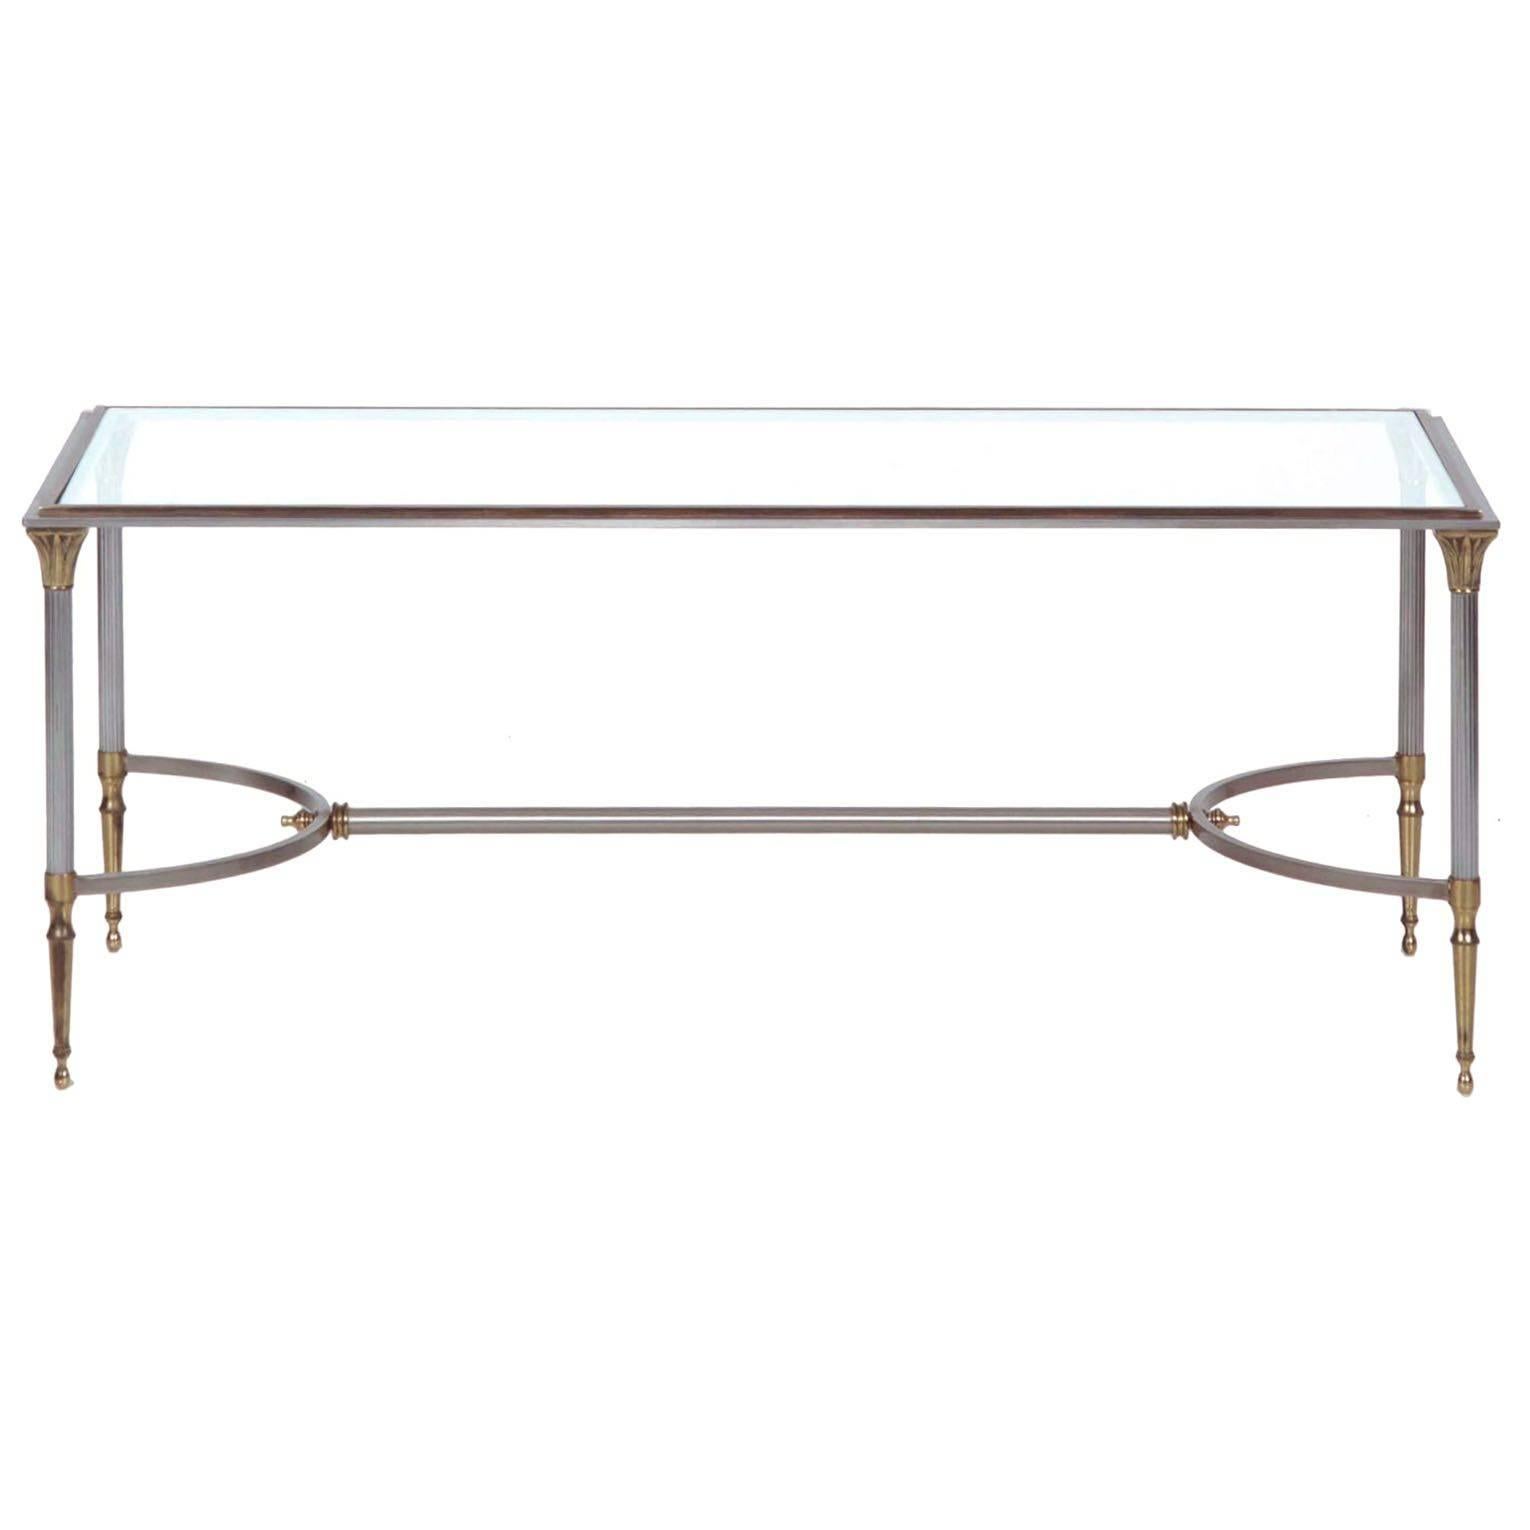 A piece of the highest quality throughout, this fine low table is designed in the neoclassical taste using elements that at their time were on the cutting edge. Utilizing cast steel, solid flat bar and reeded tubing, the atelier flawlessly melds a